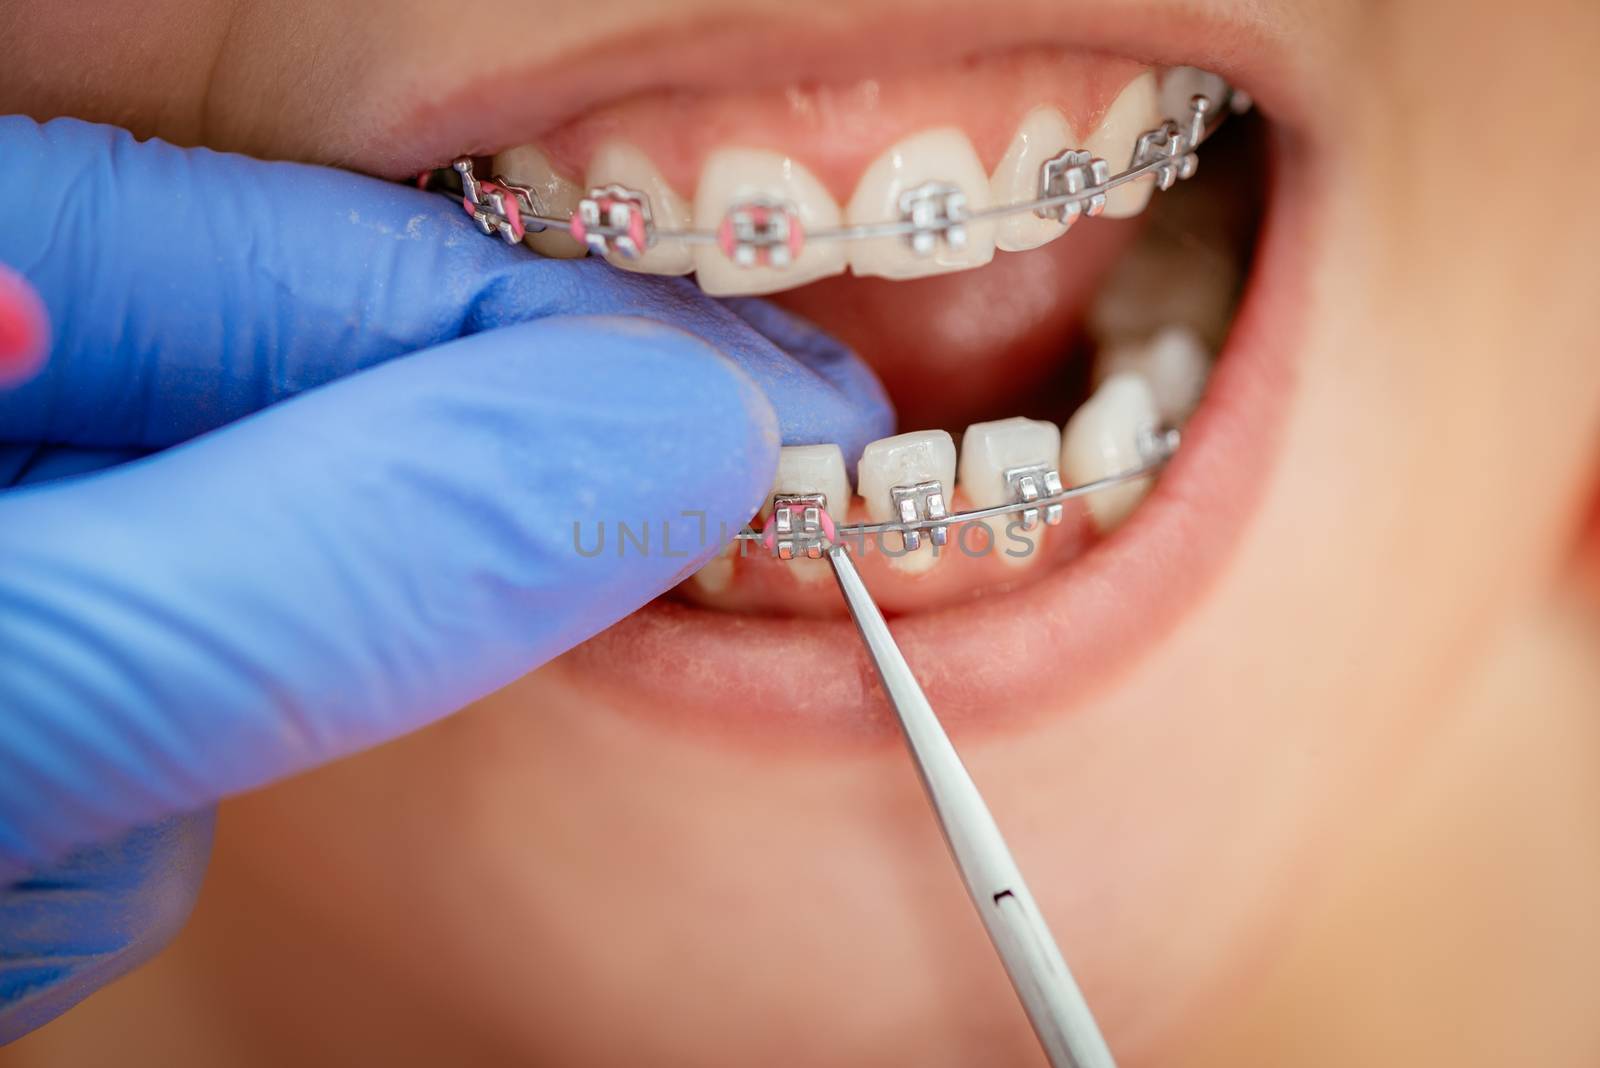 Dentist checking bracket at the braces on the female patient. Close-up. Real People.